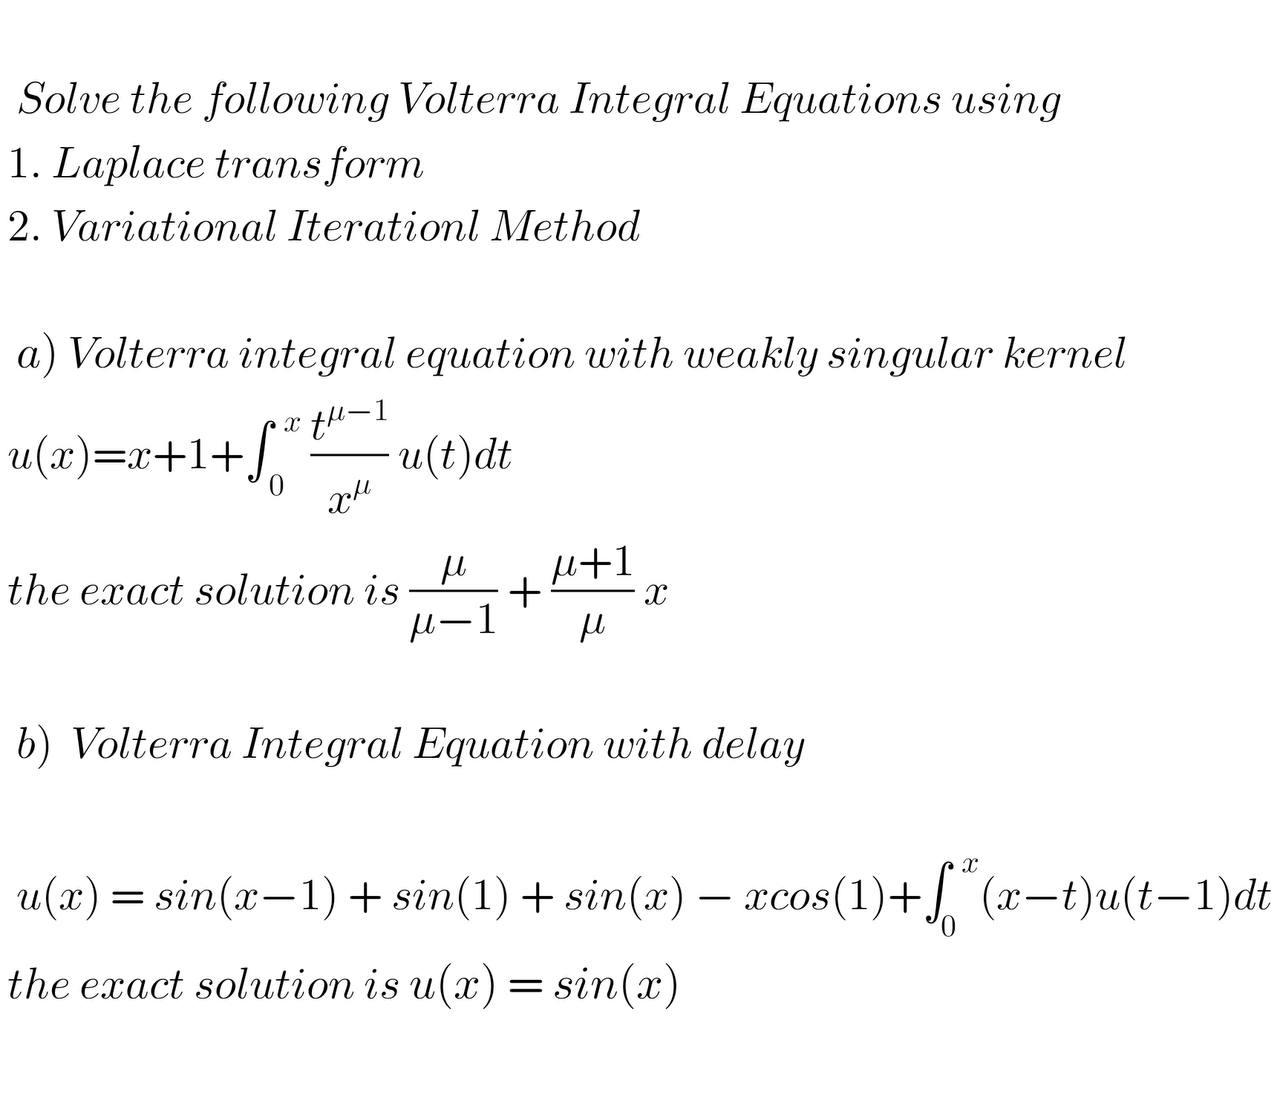 Solve the following Volterra Integral Equations using 1. Laplace transform 2. Variational Iterationl Method